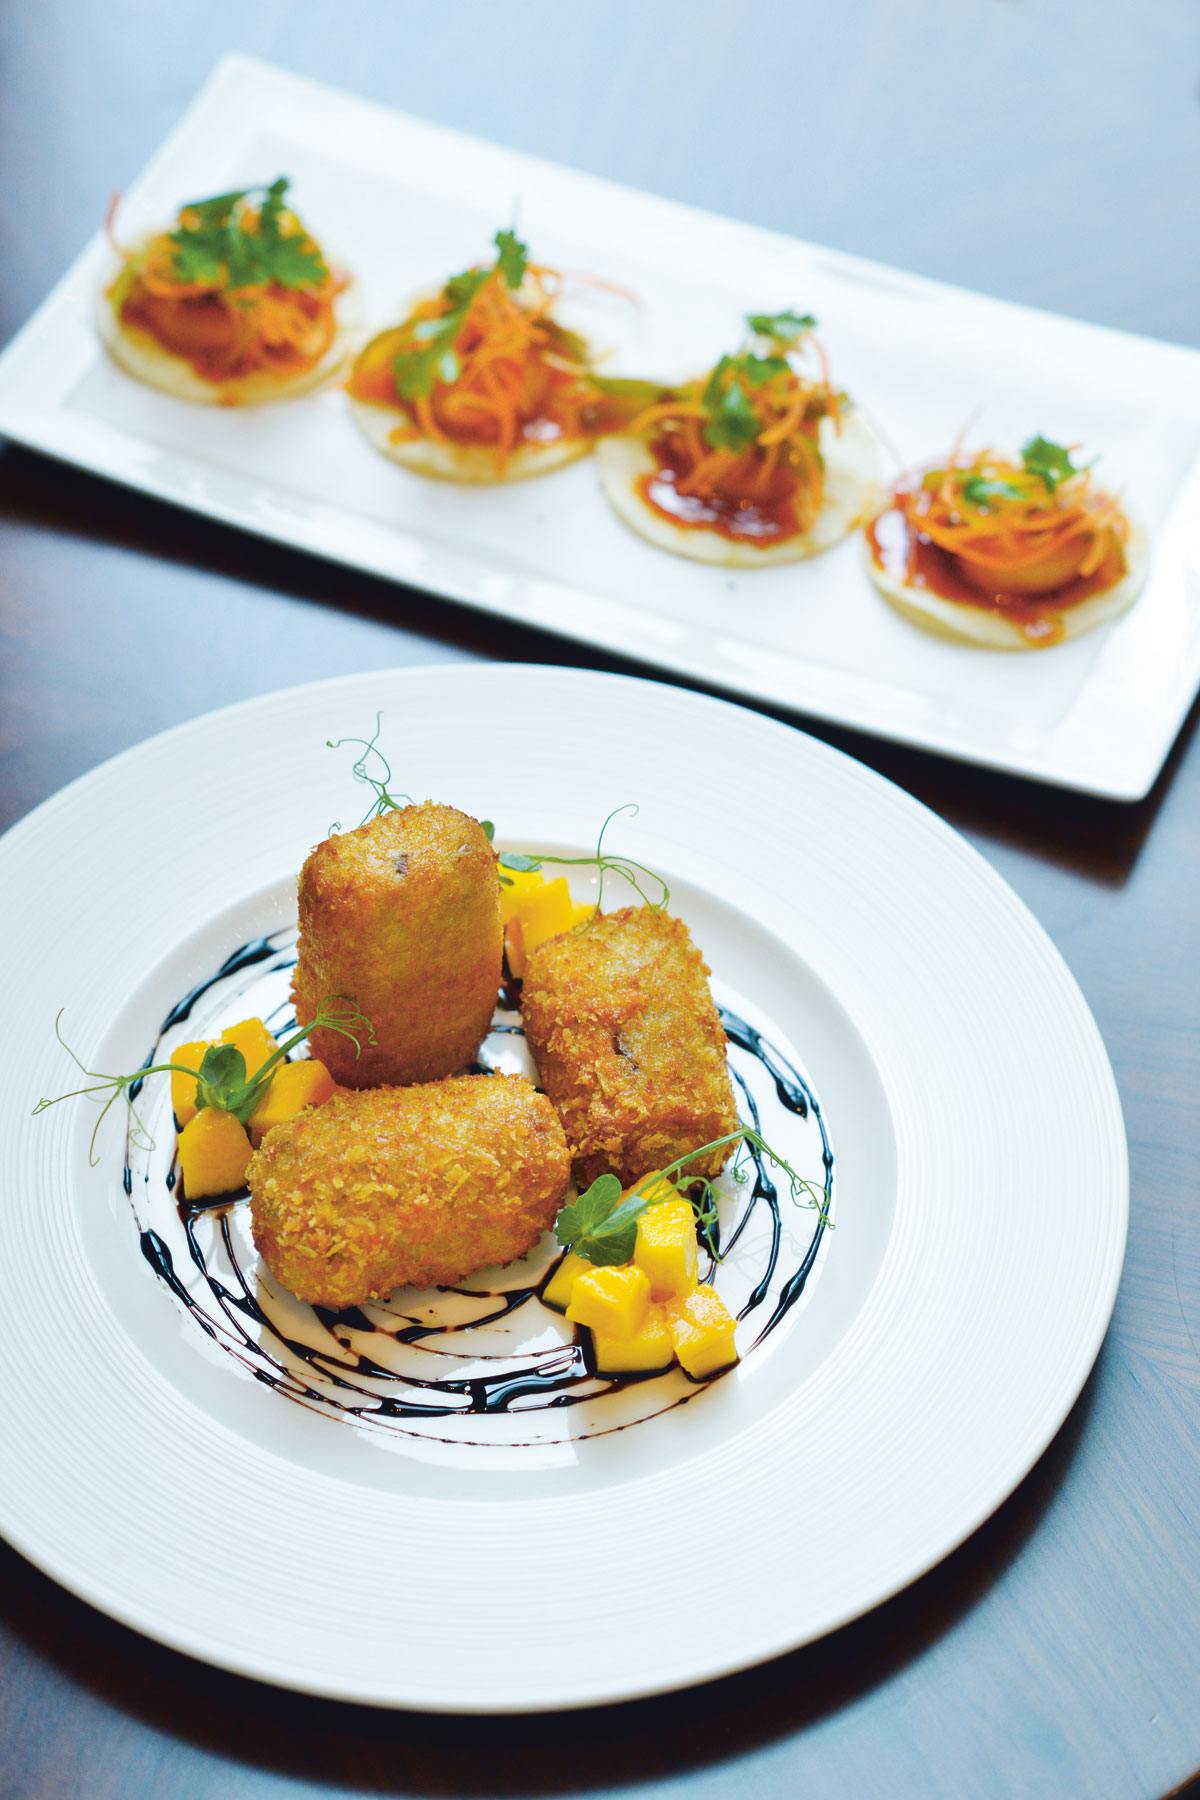 High Street Lounge's truffle and cheese croquetas and Manila prawn escabeche